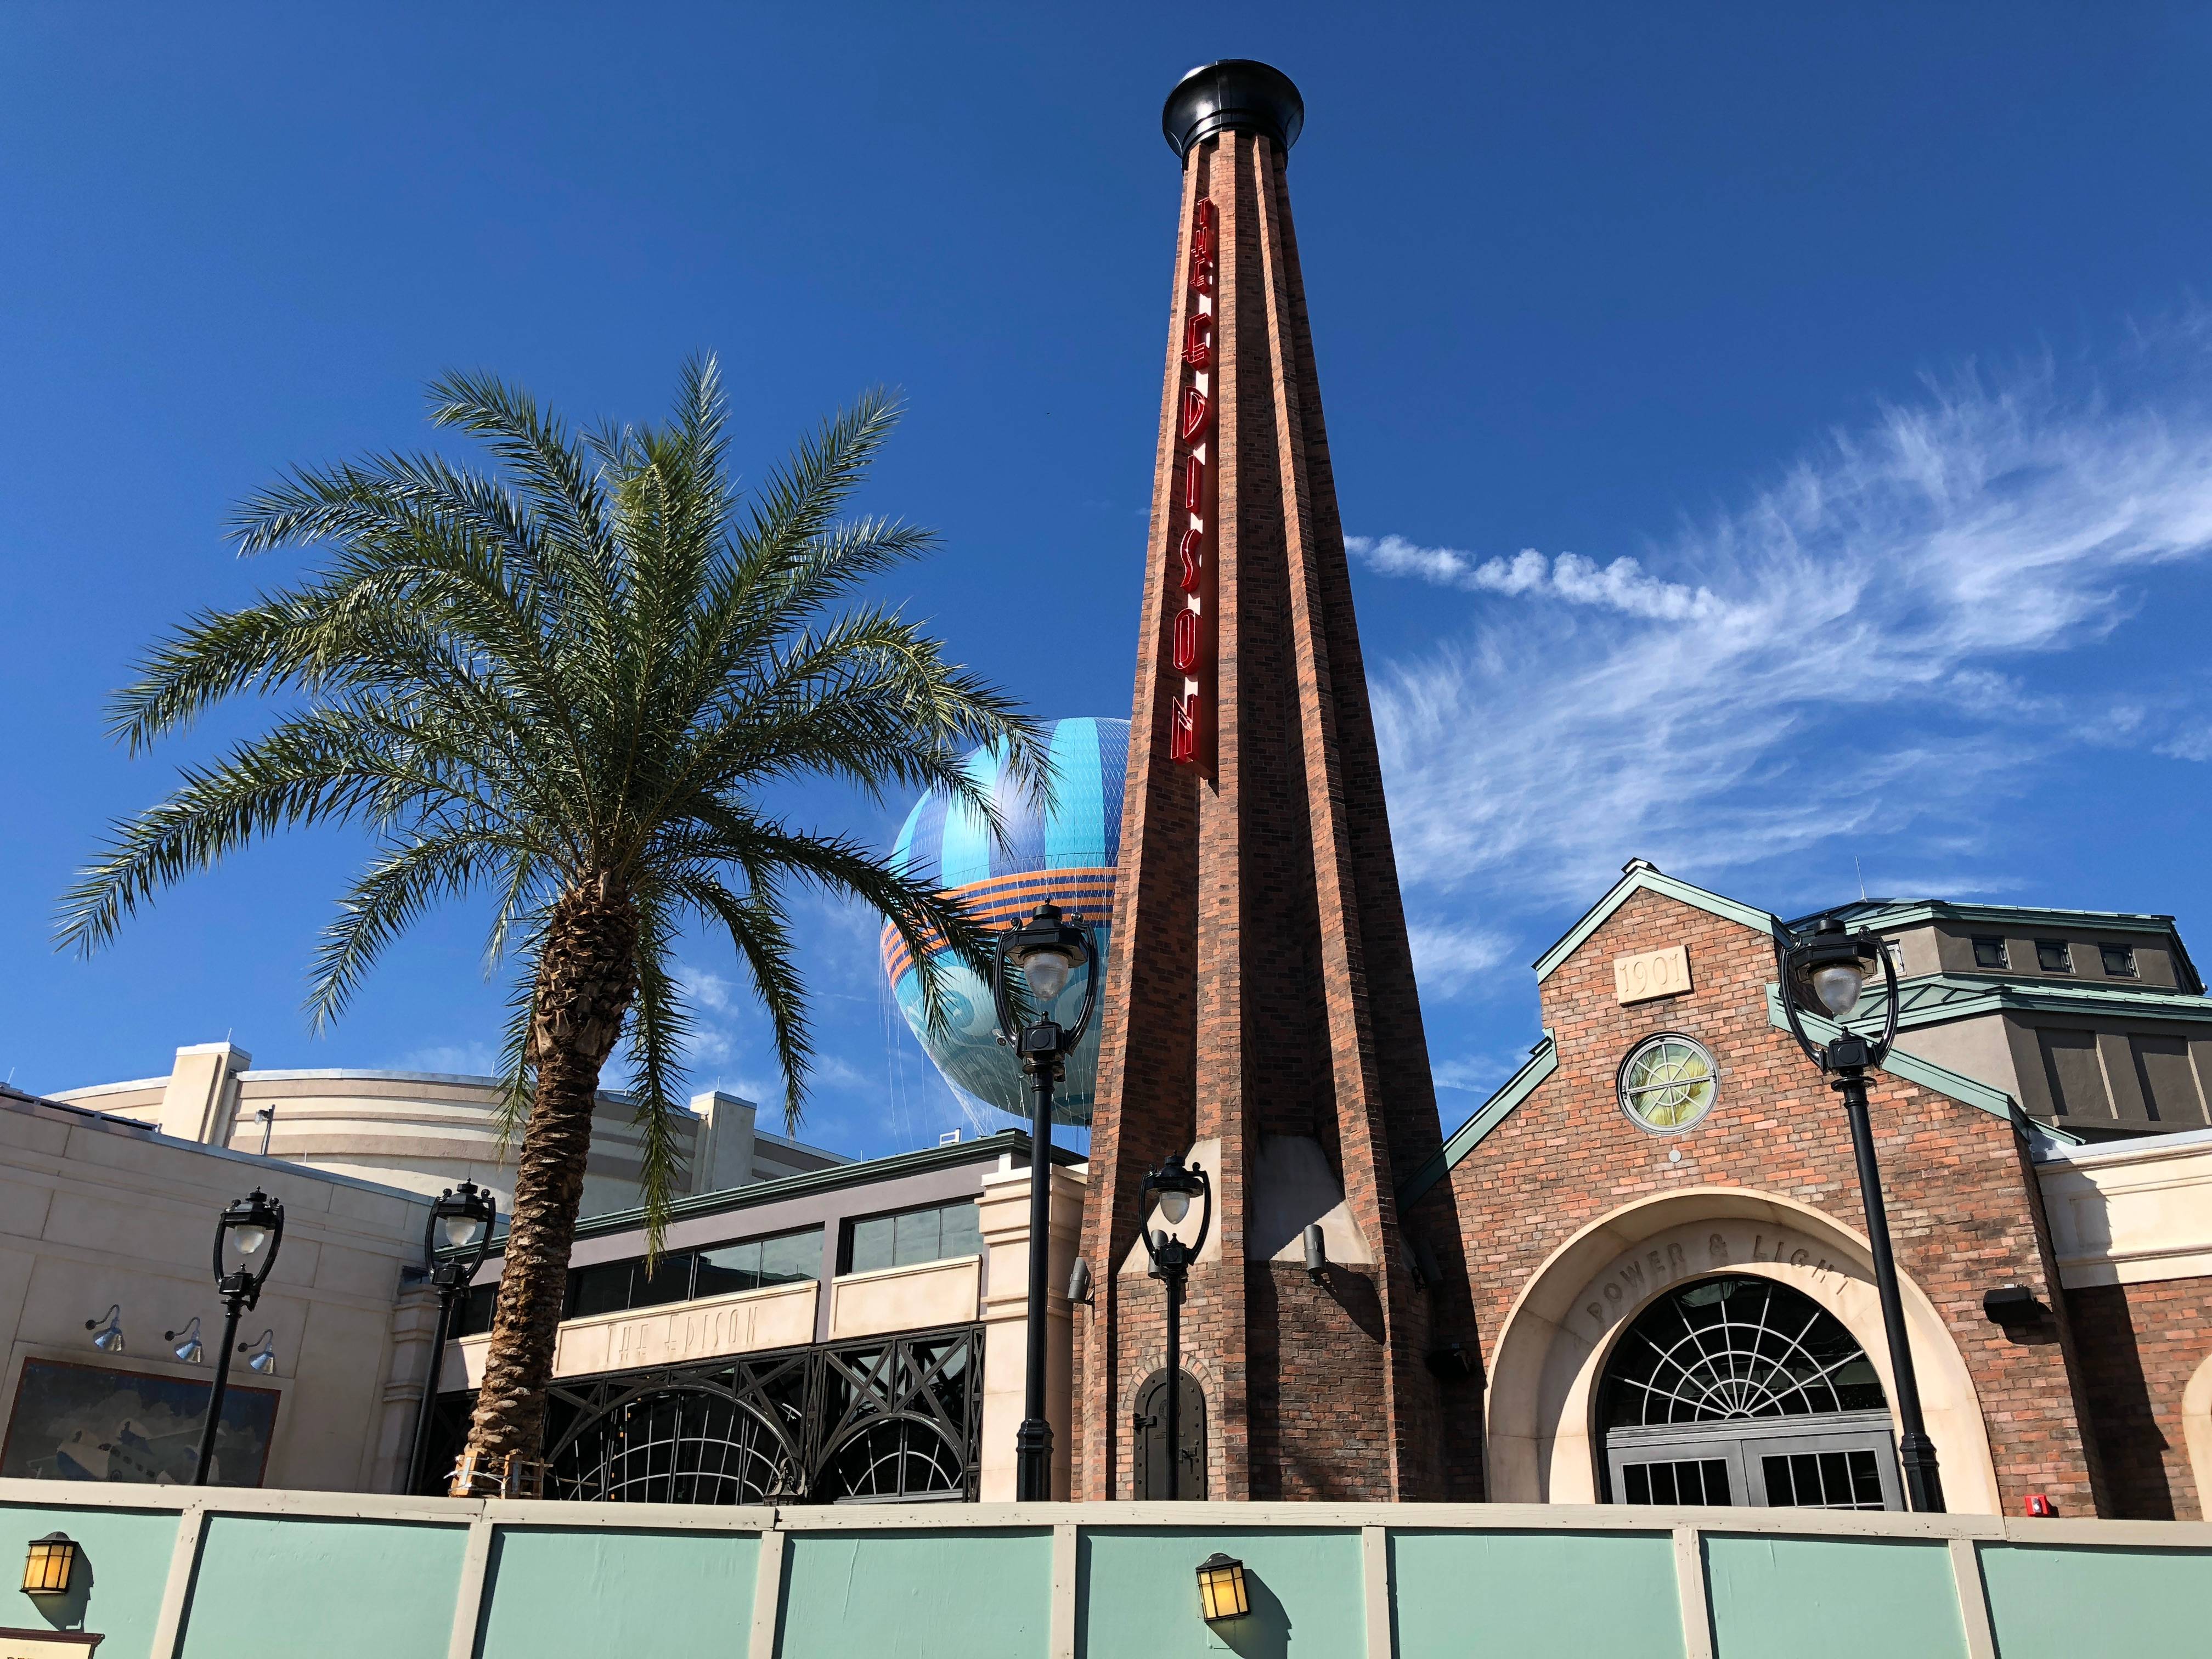 More details on the food, drink and entertainment at The Edison